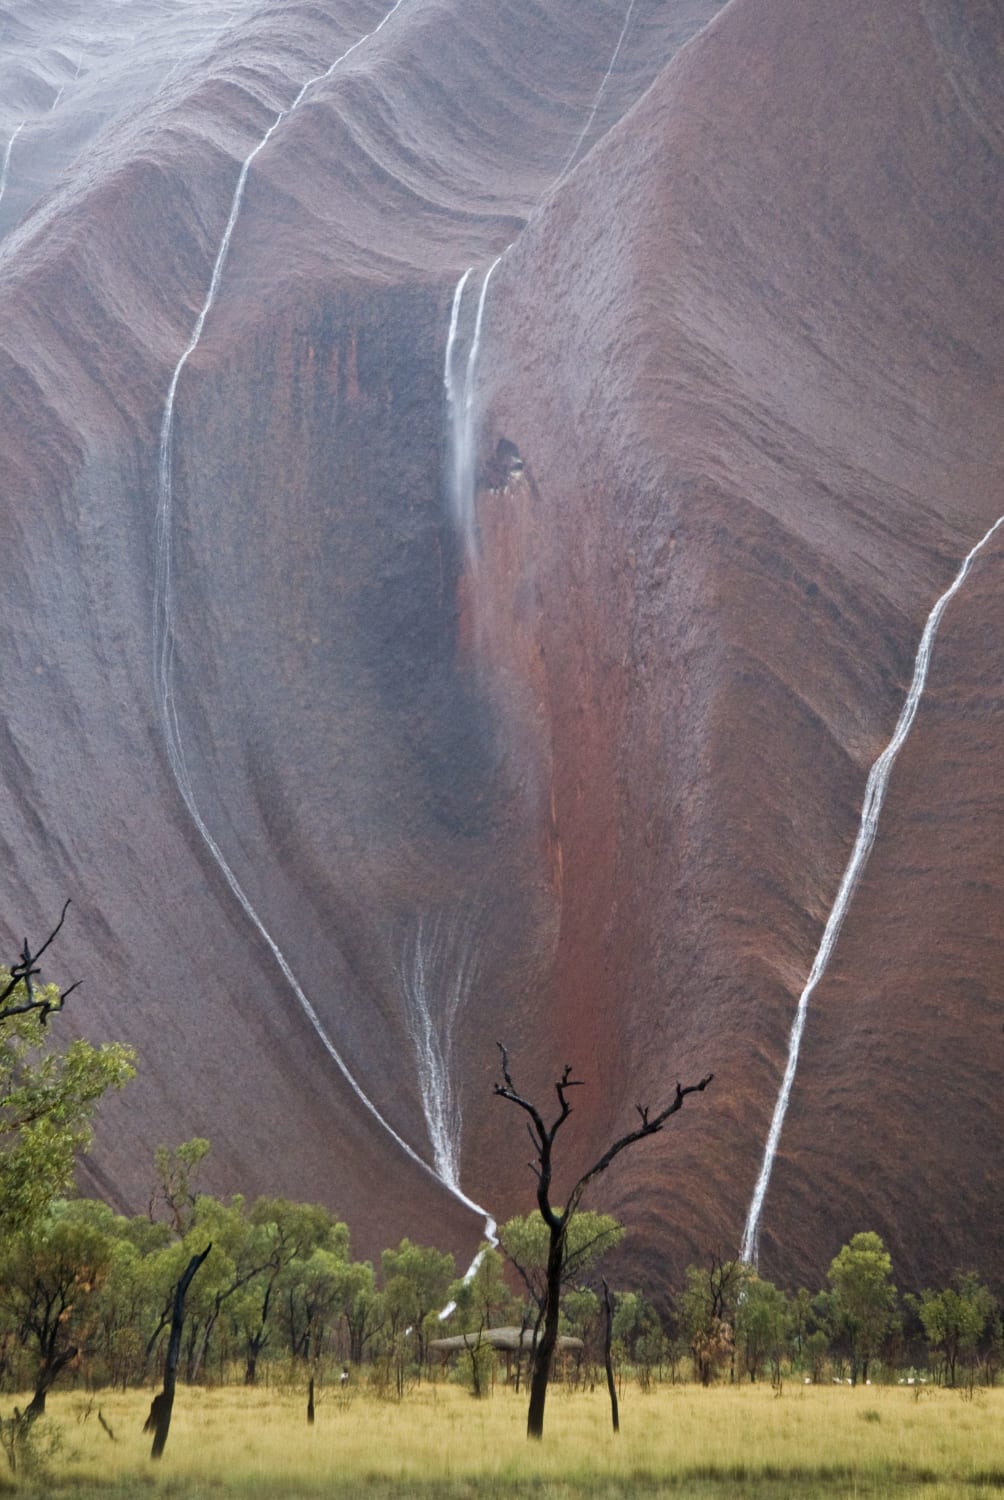 Uluru Waterfalls | Wonders of the world, Beautiful places, Places to travel